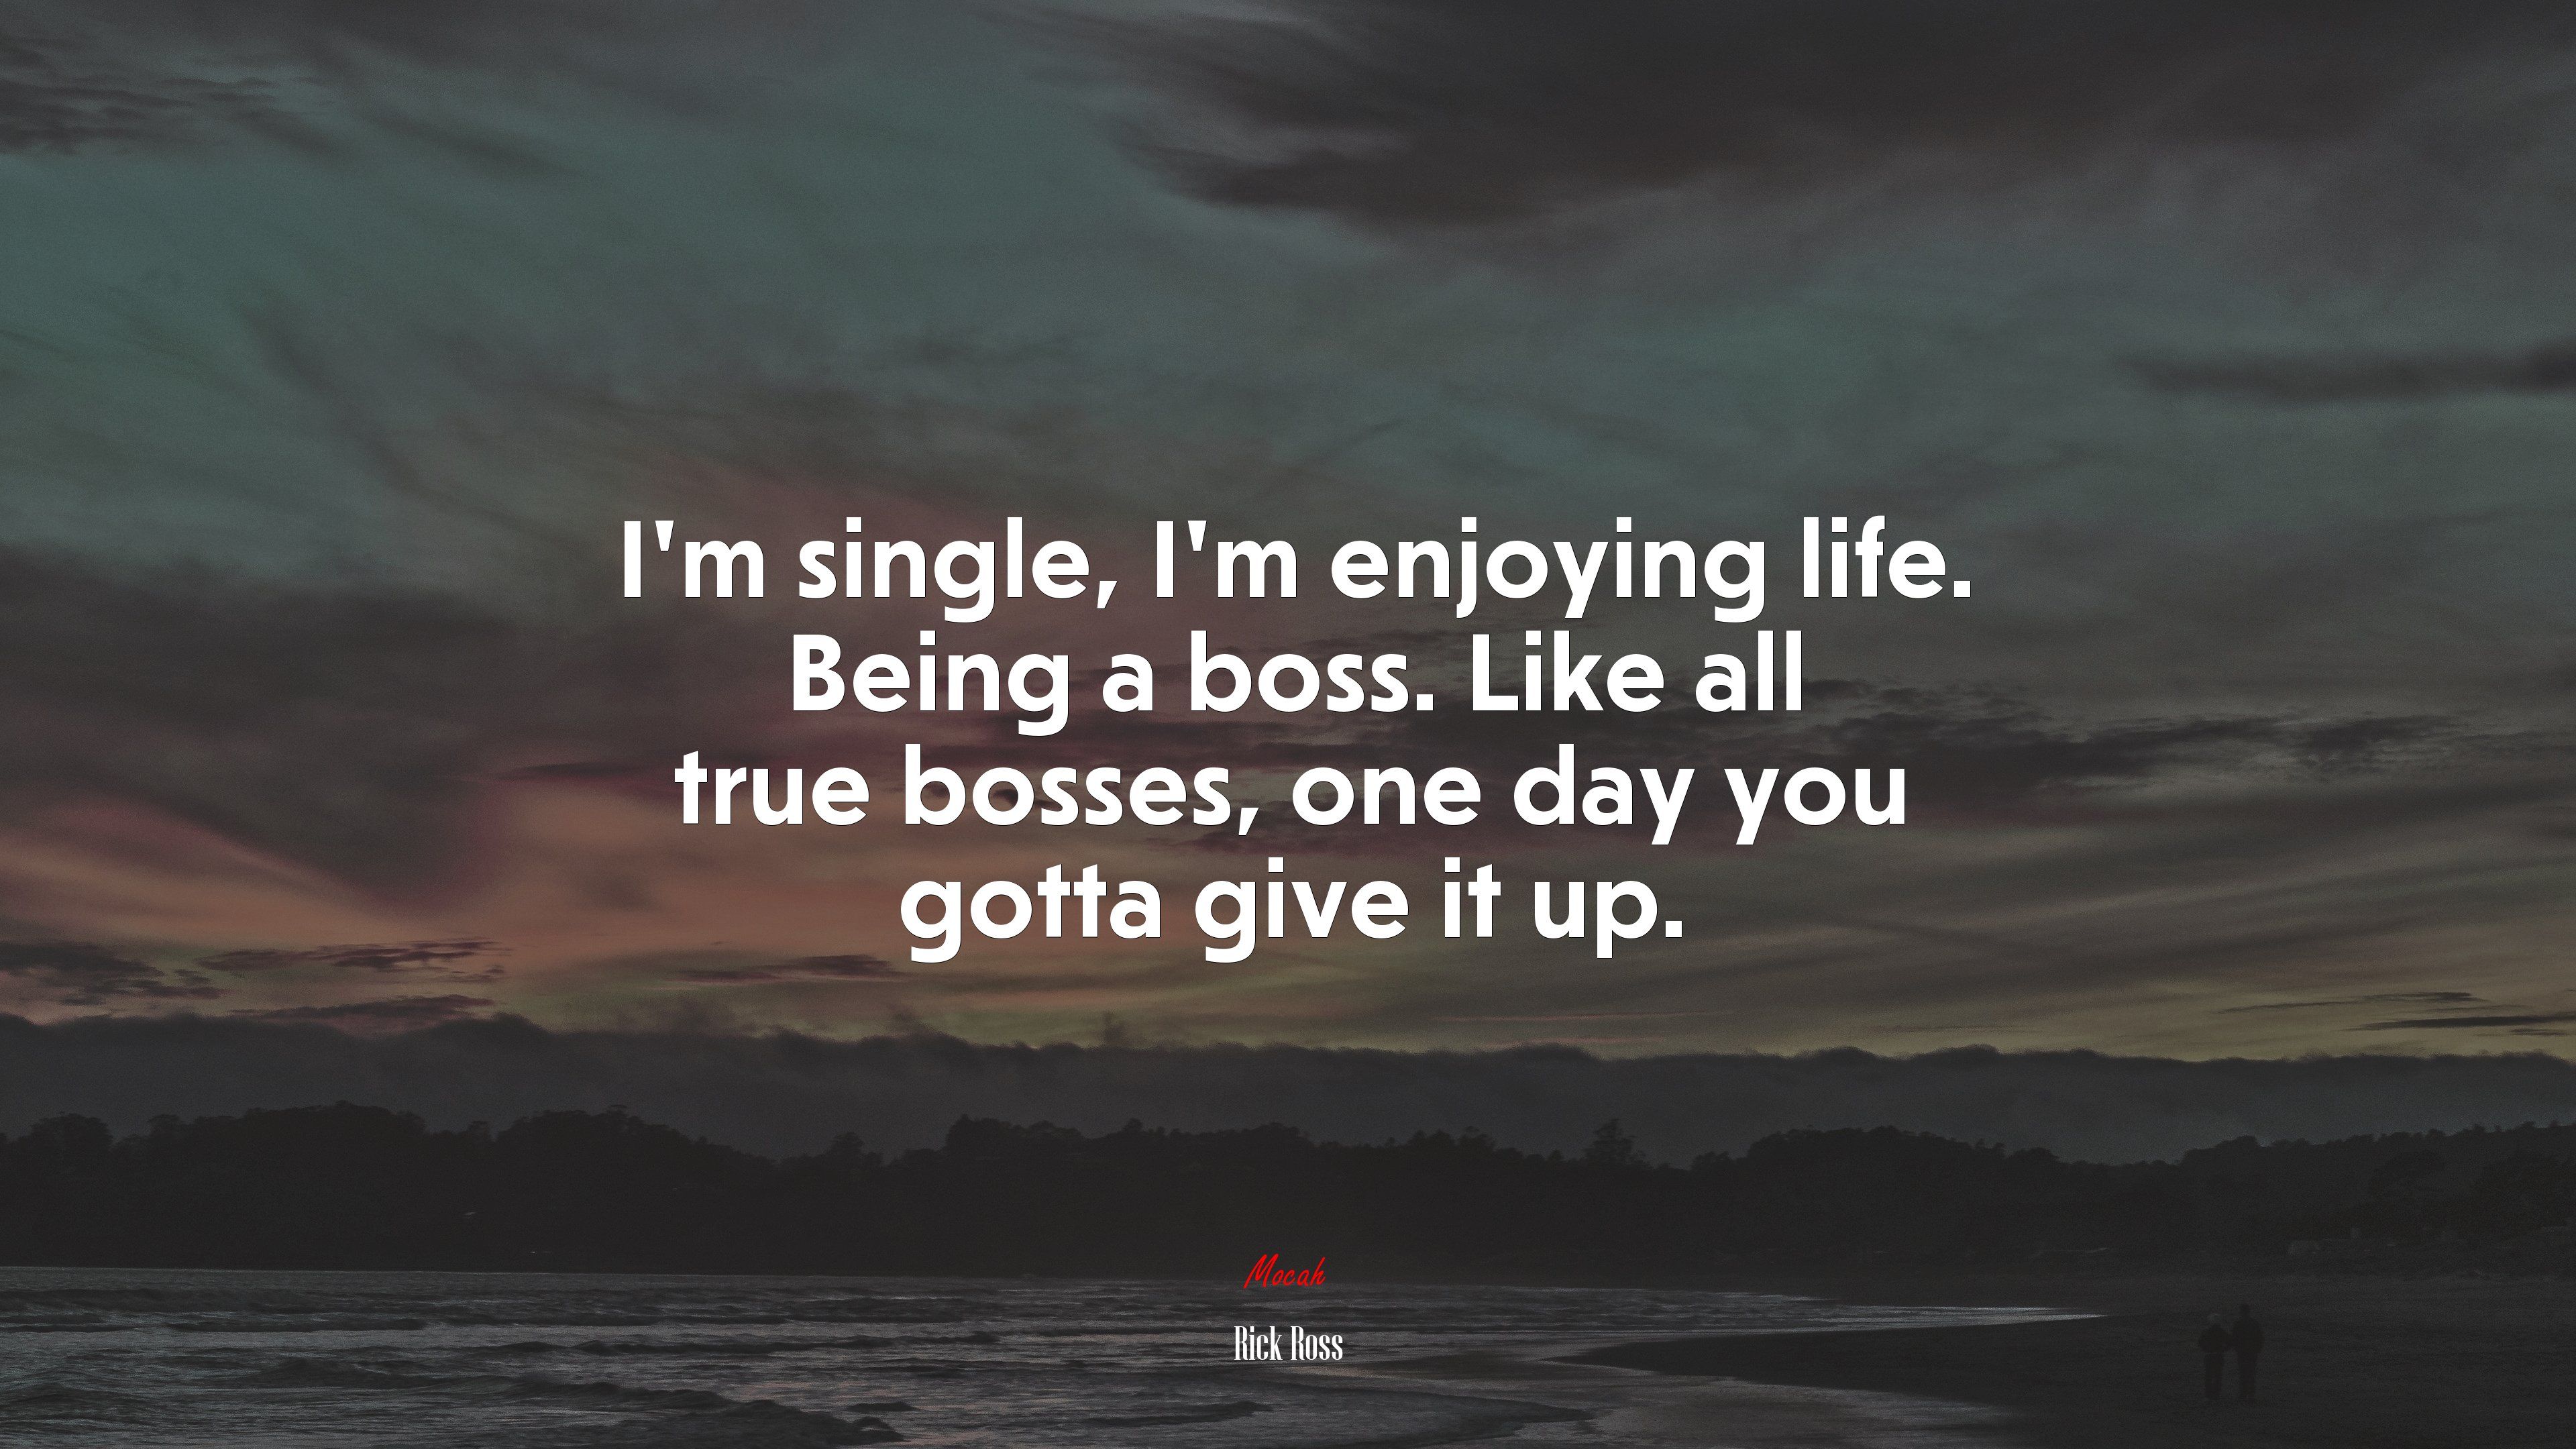 I'm single, I'm enjoying life. Being a boss. Like all true bosses, one day you gotta give it up. Rick Ross quote, 4k wallpaper. Mocah.org HD Desktop Wallpaper